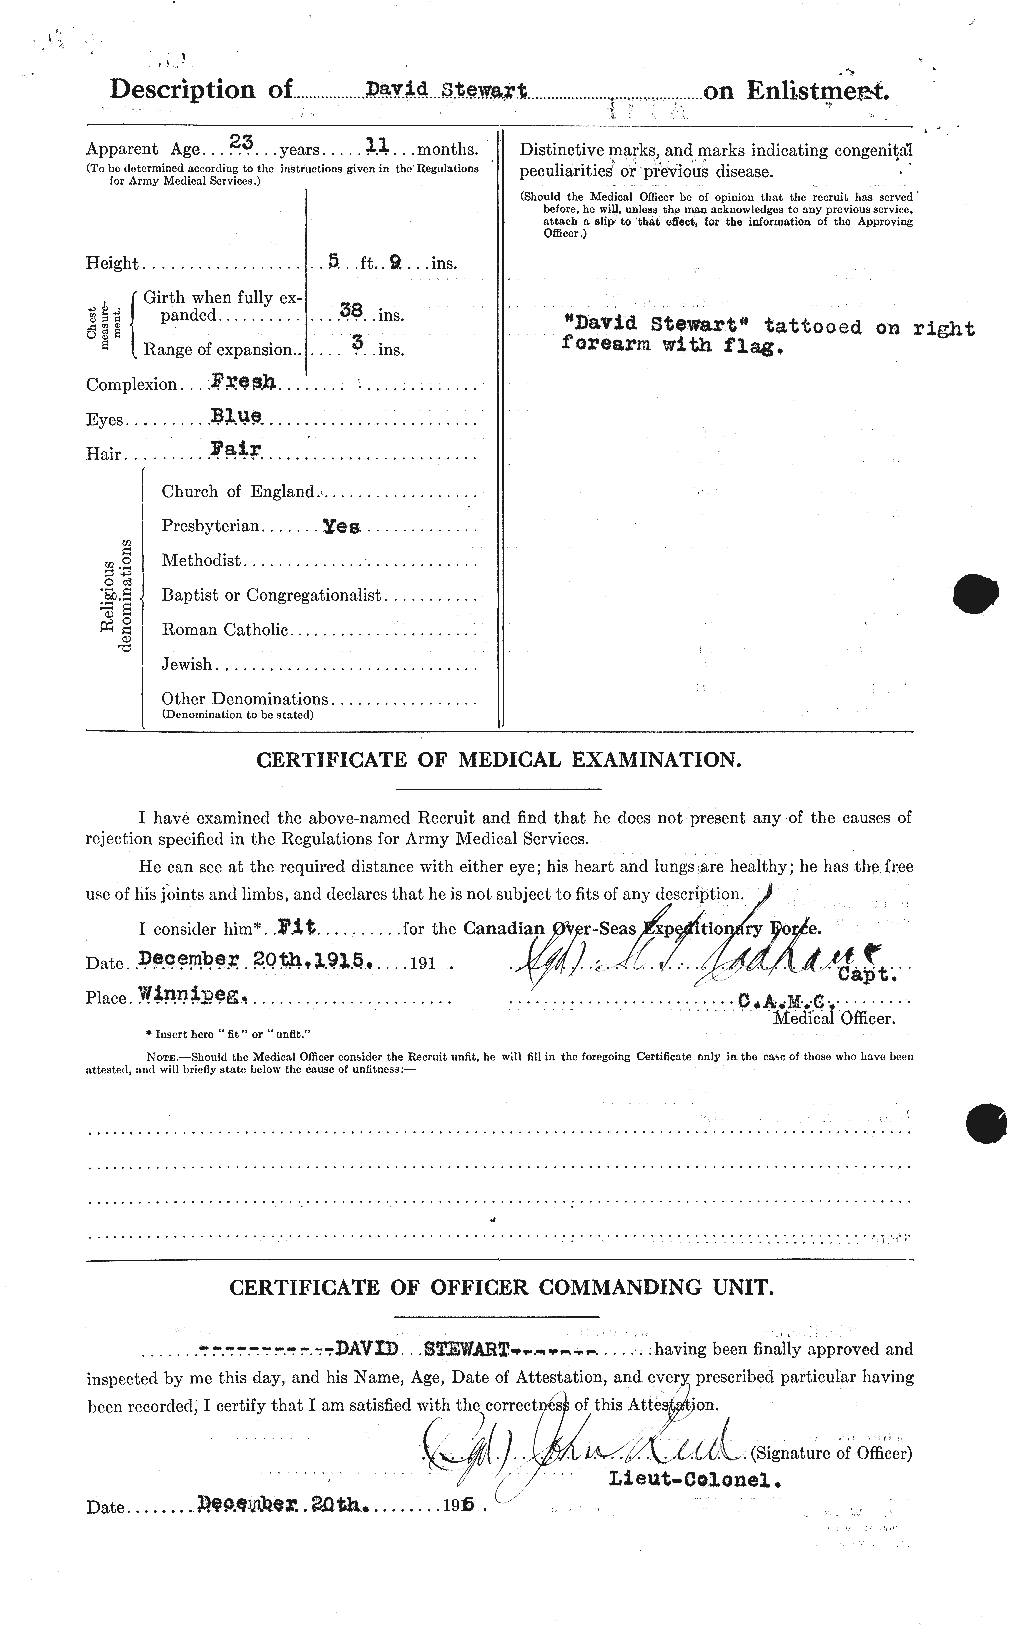 Personnel Records of the First World War - CEF 623220b